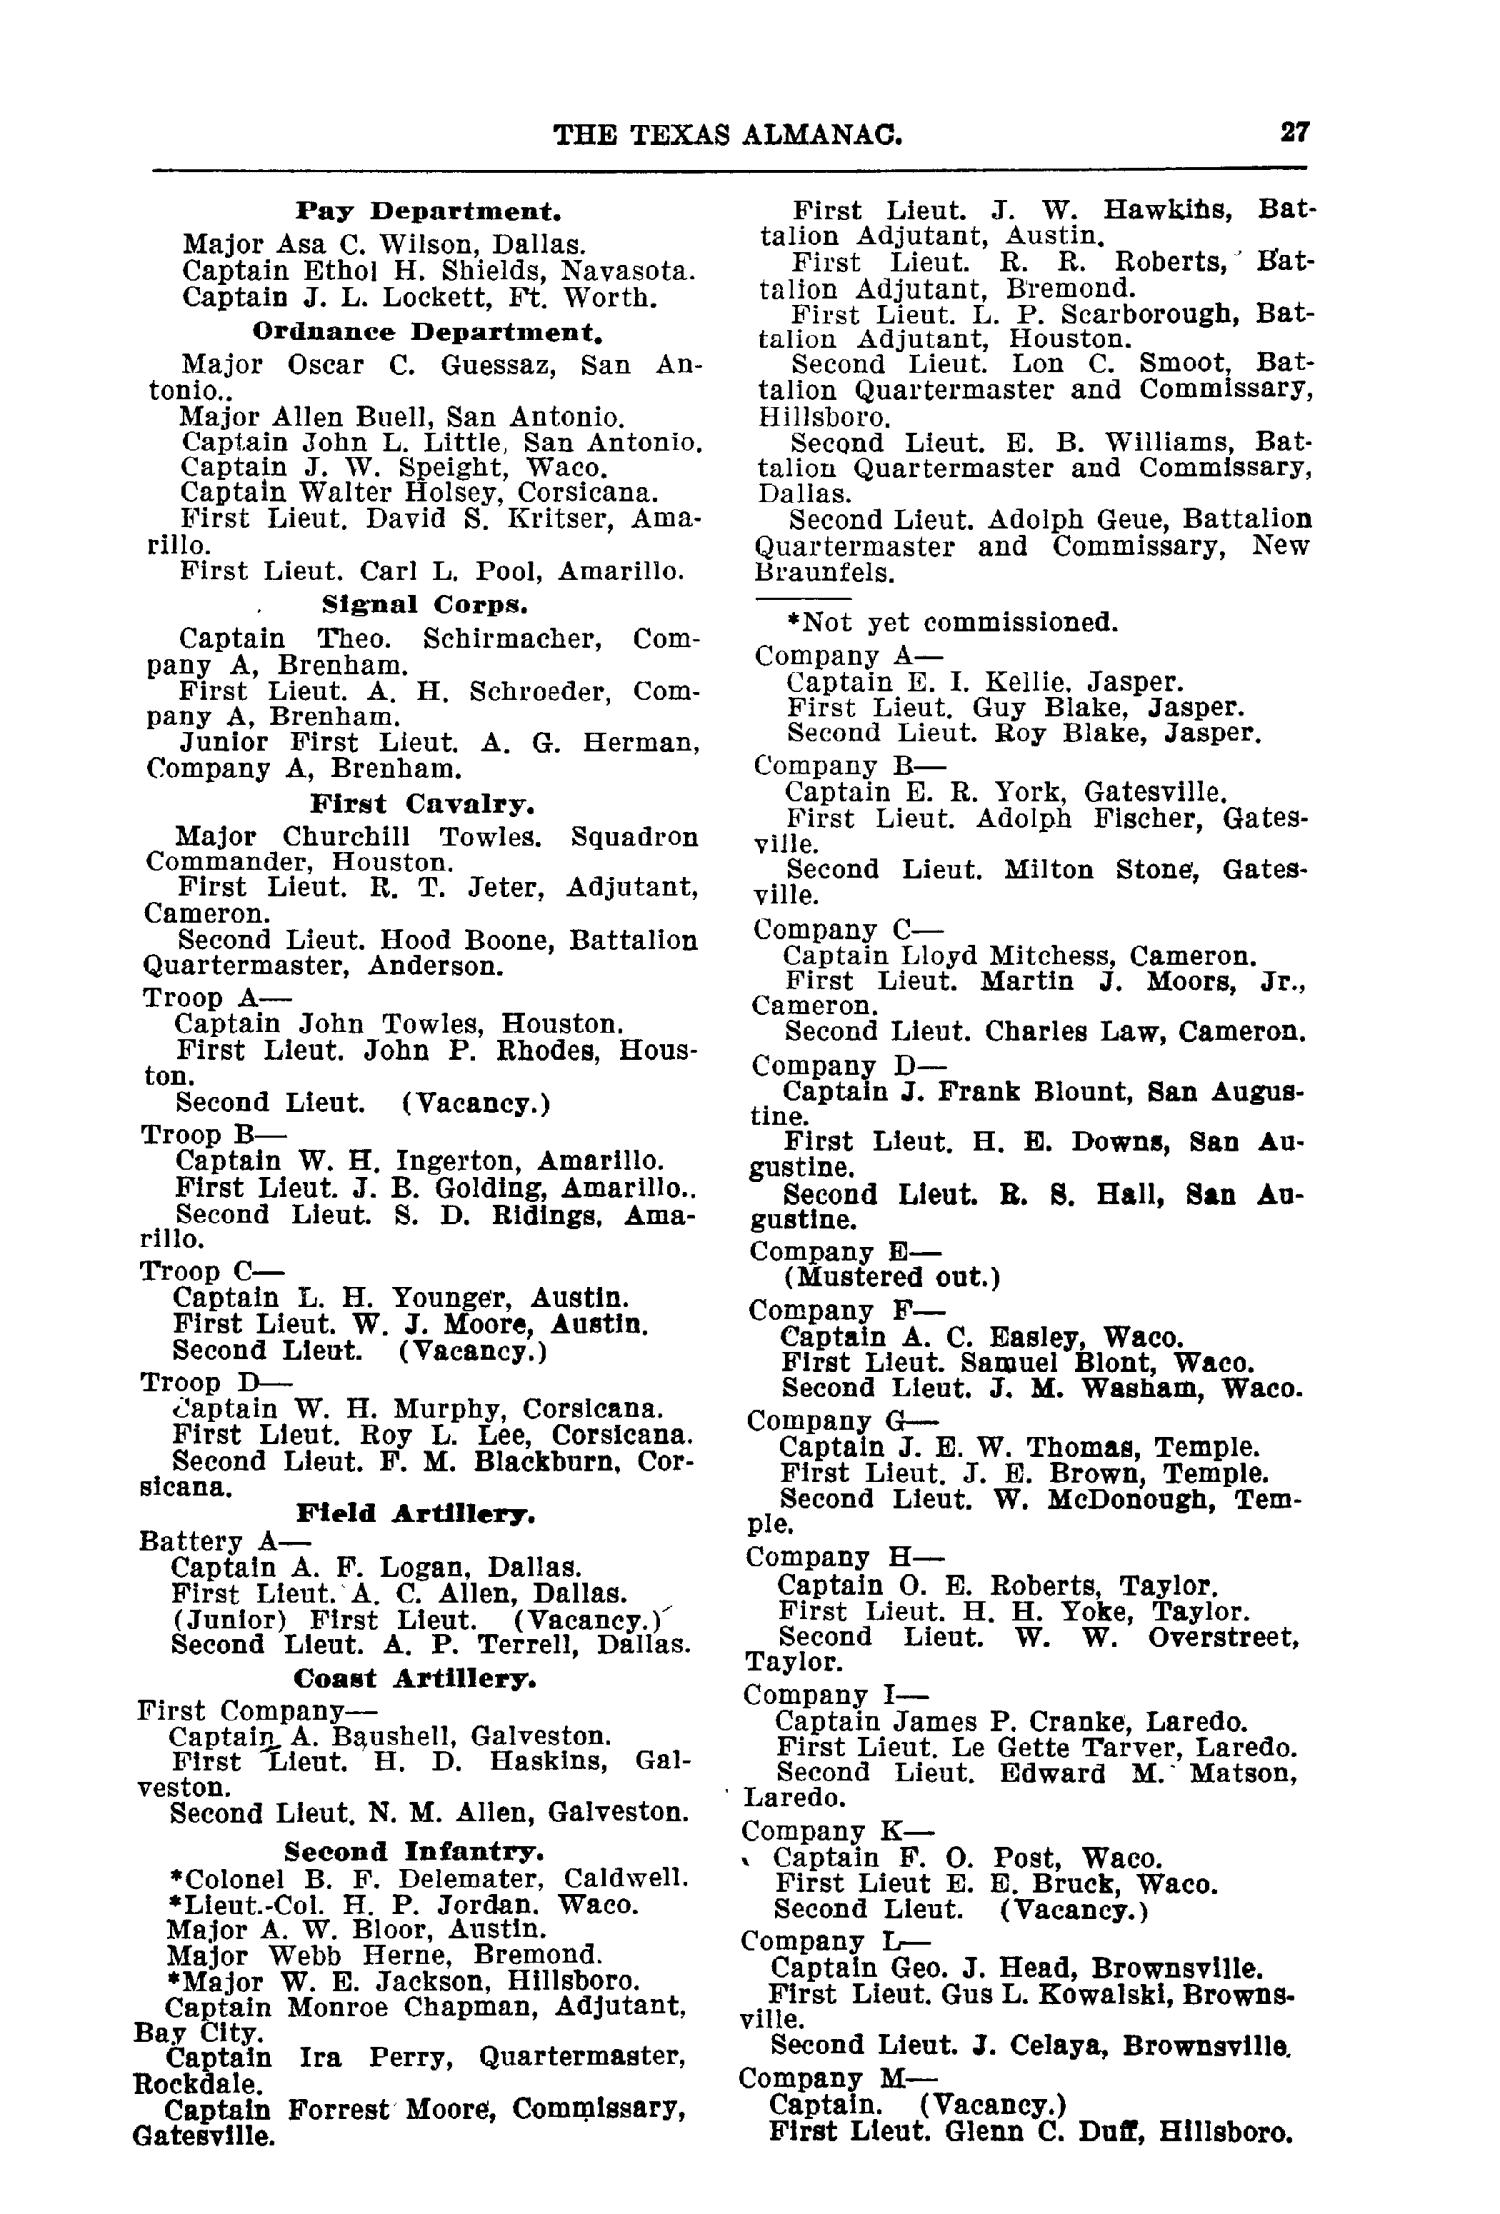 Texas Almanac and State Industrial Guide for 1911 with Map
                                                
                                                    27
                                                